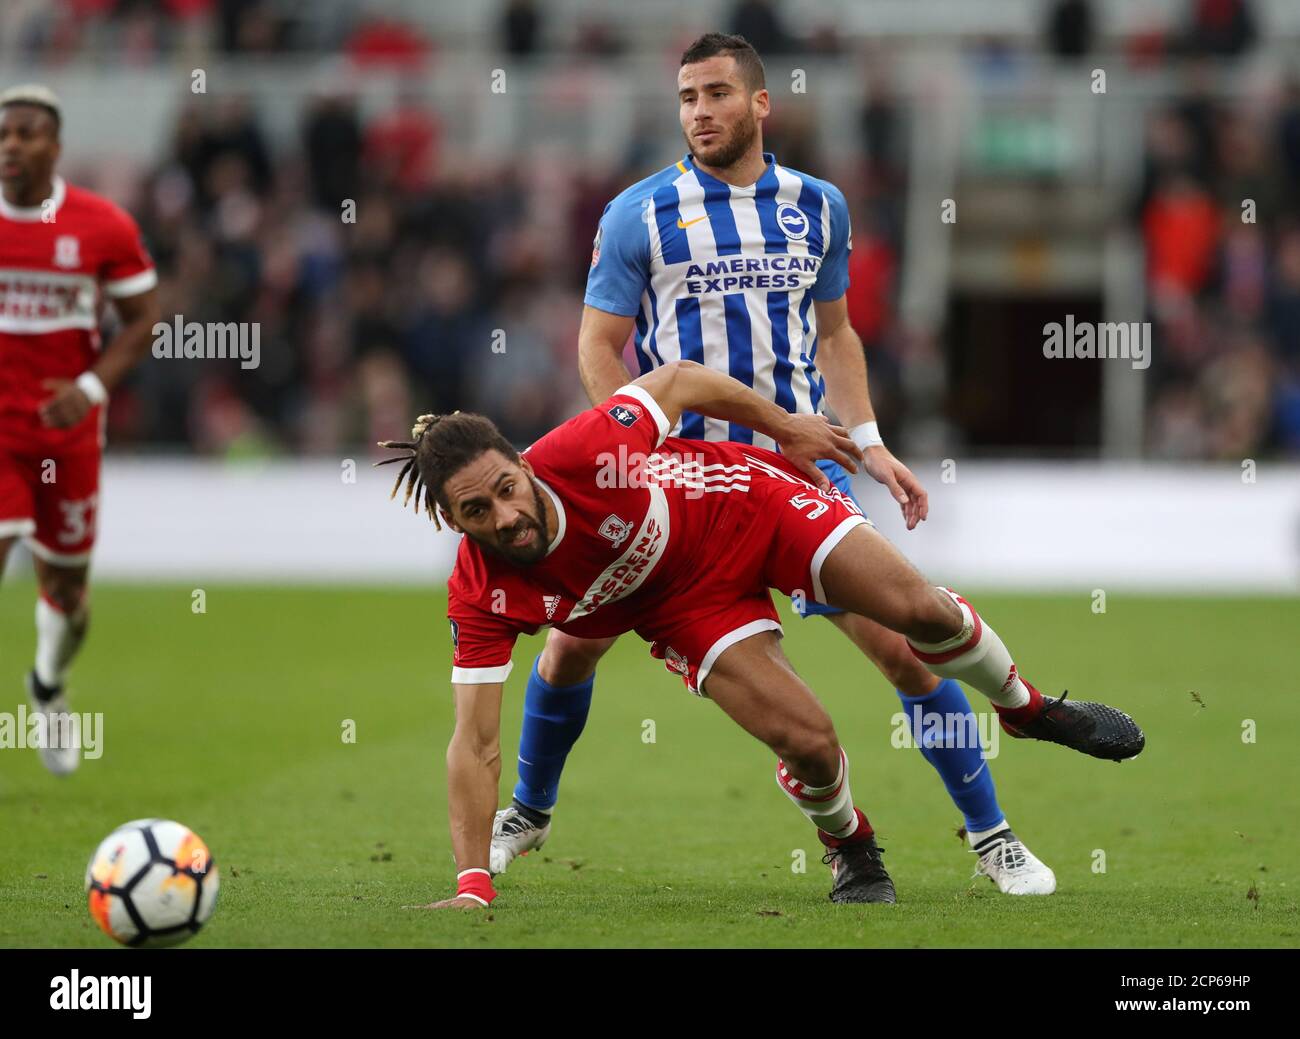 Soccer Football - FA Cup Fourth Round - Middlesbrough vs Brighton & Hove Albion - Riverside Stadium, Middlesbrough, Britain - January 27, 2018   Middlesbrough's Ryan Shotton in action with Brighton's Tomer Hemed   REUTERS/Scott Heppell Stock Photo